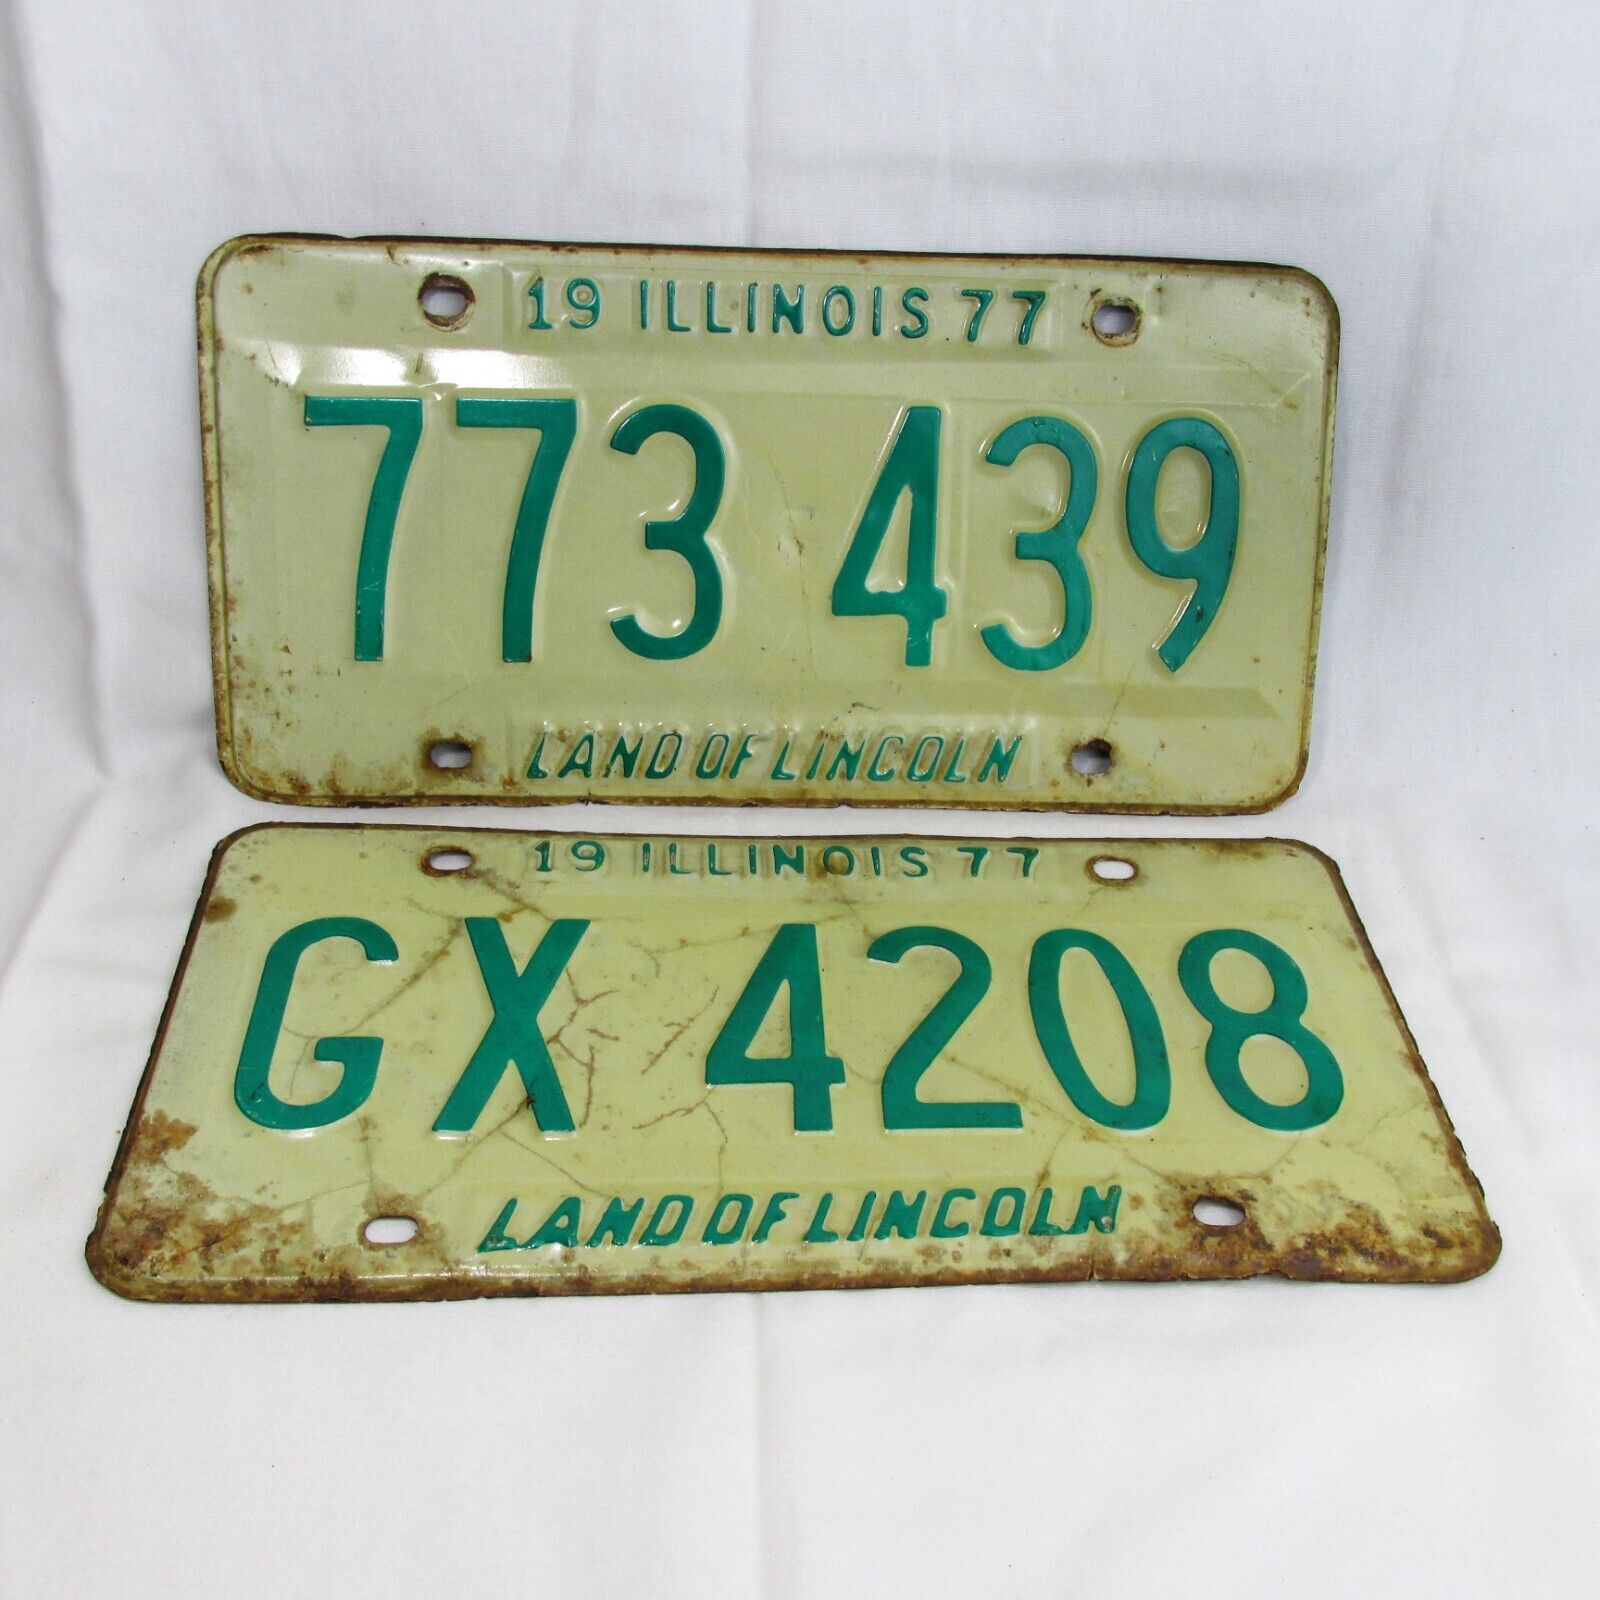 Vtg Lot of (2) 1977 Illinois License Plates 773 439 & GX 4208 Land of Lincoln